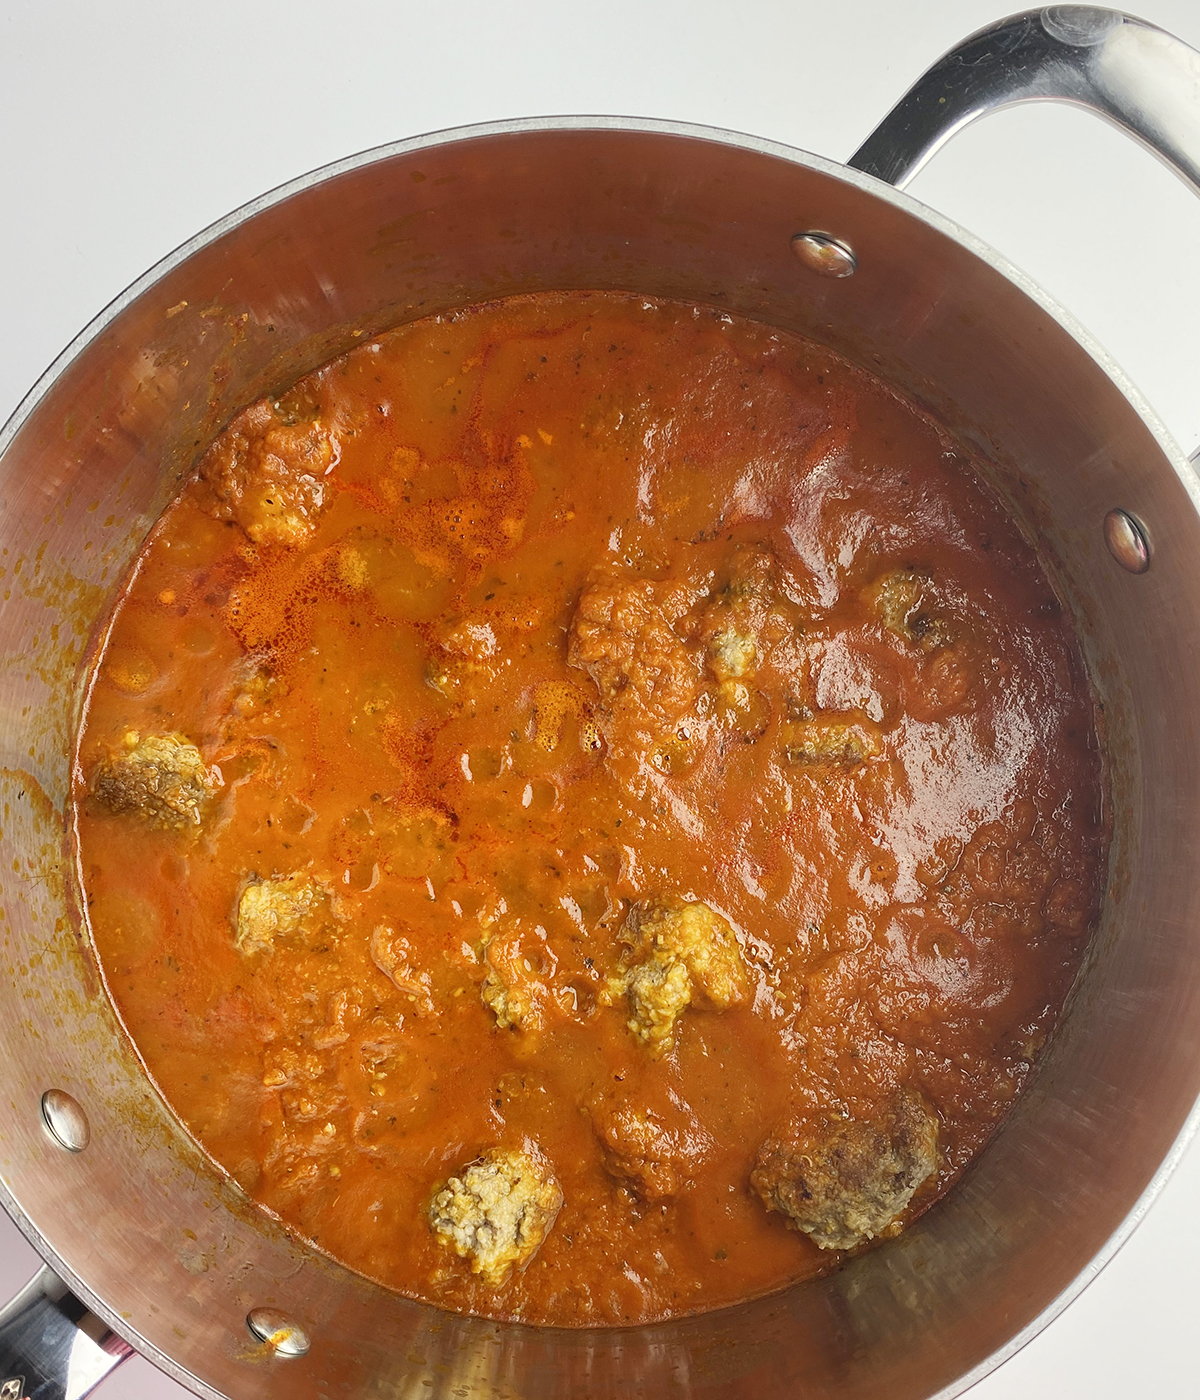 Meatballs and tomato sauce in a pot.